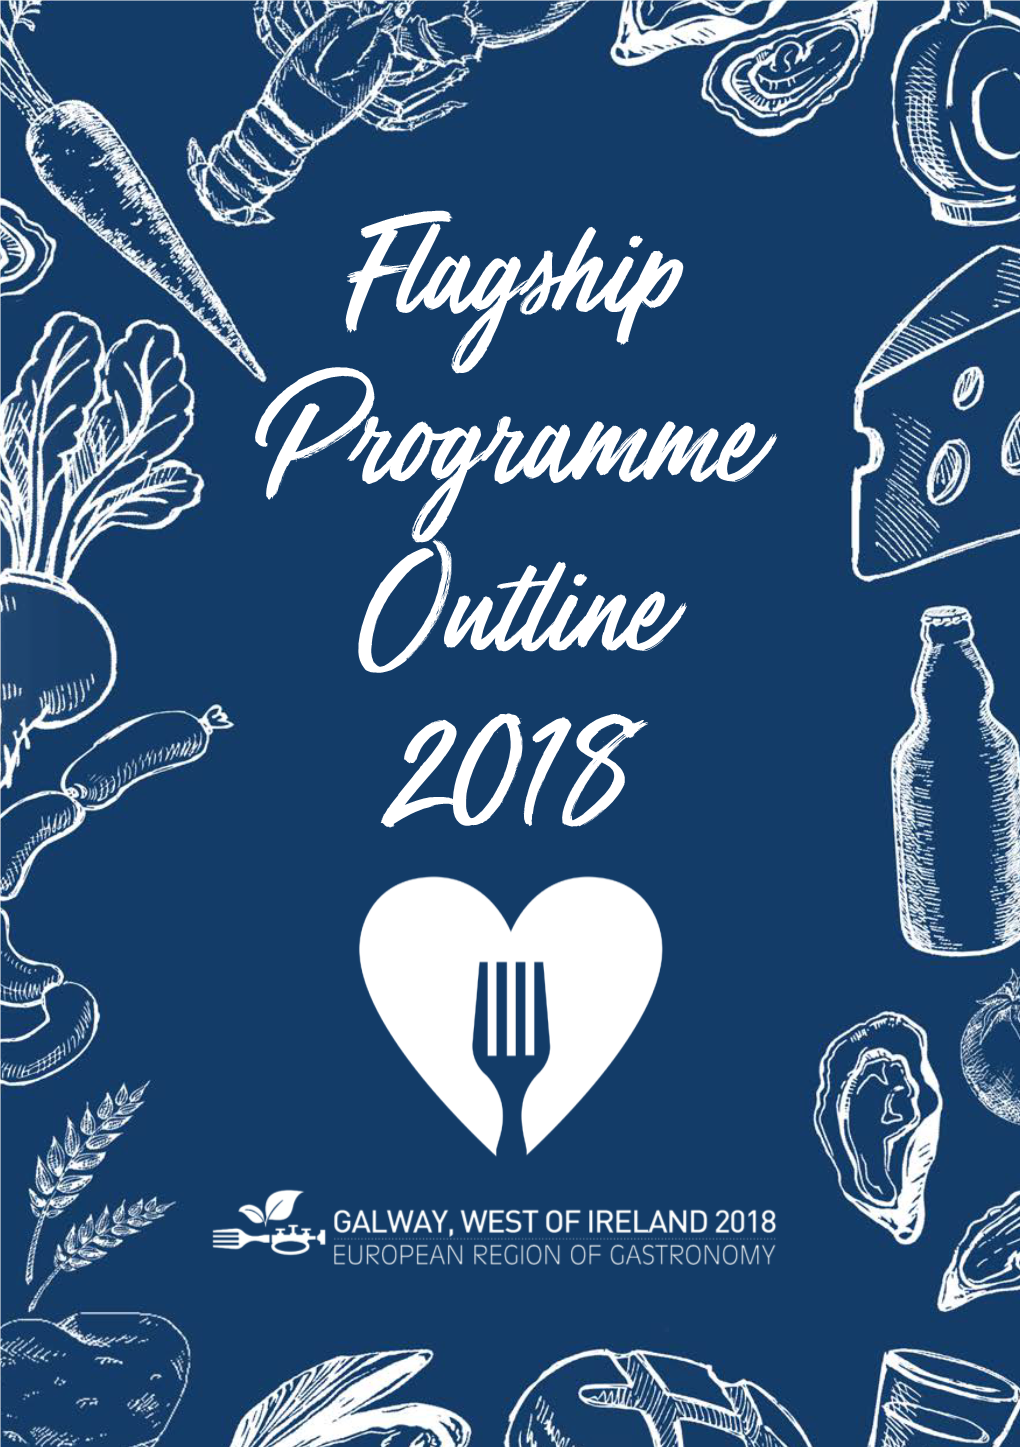 Flagship Programme Outline 2018 2018 Is Set to Be a Great Year for Food in Galway!